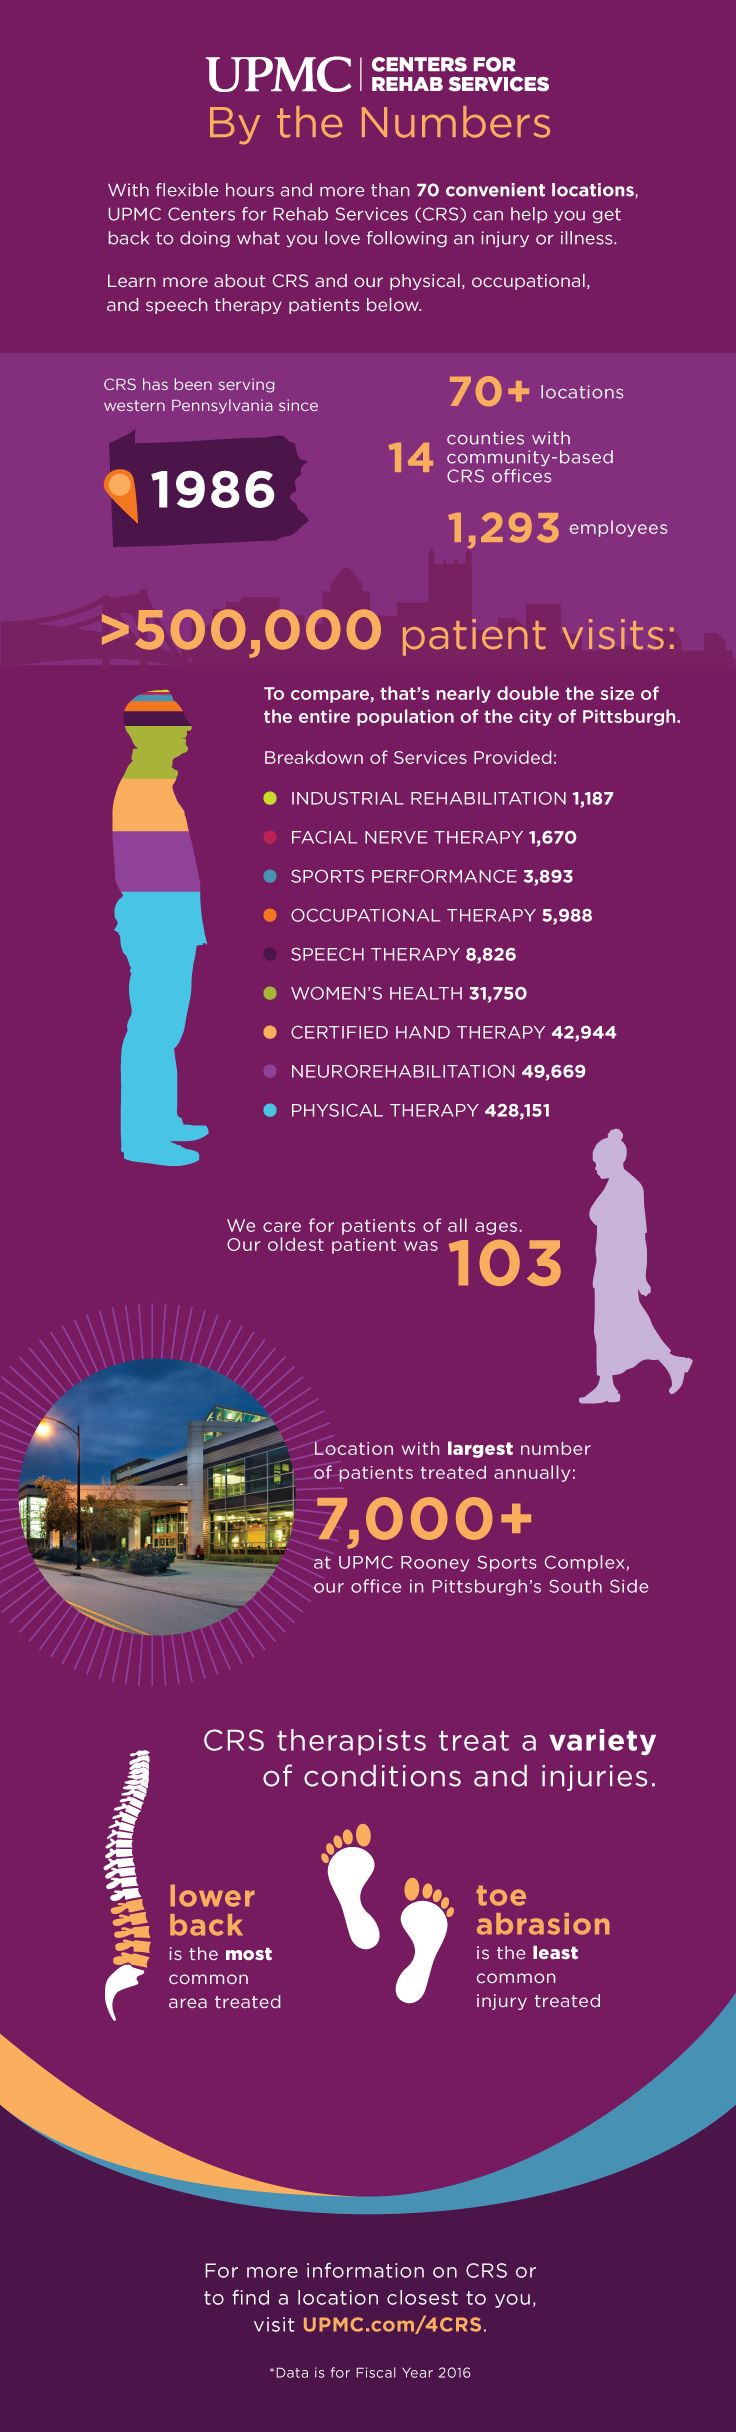 Learn more about UPMC's Centers for Rehab Services